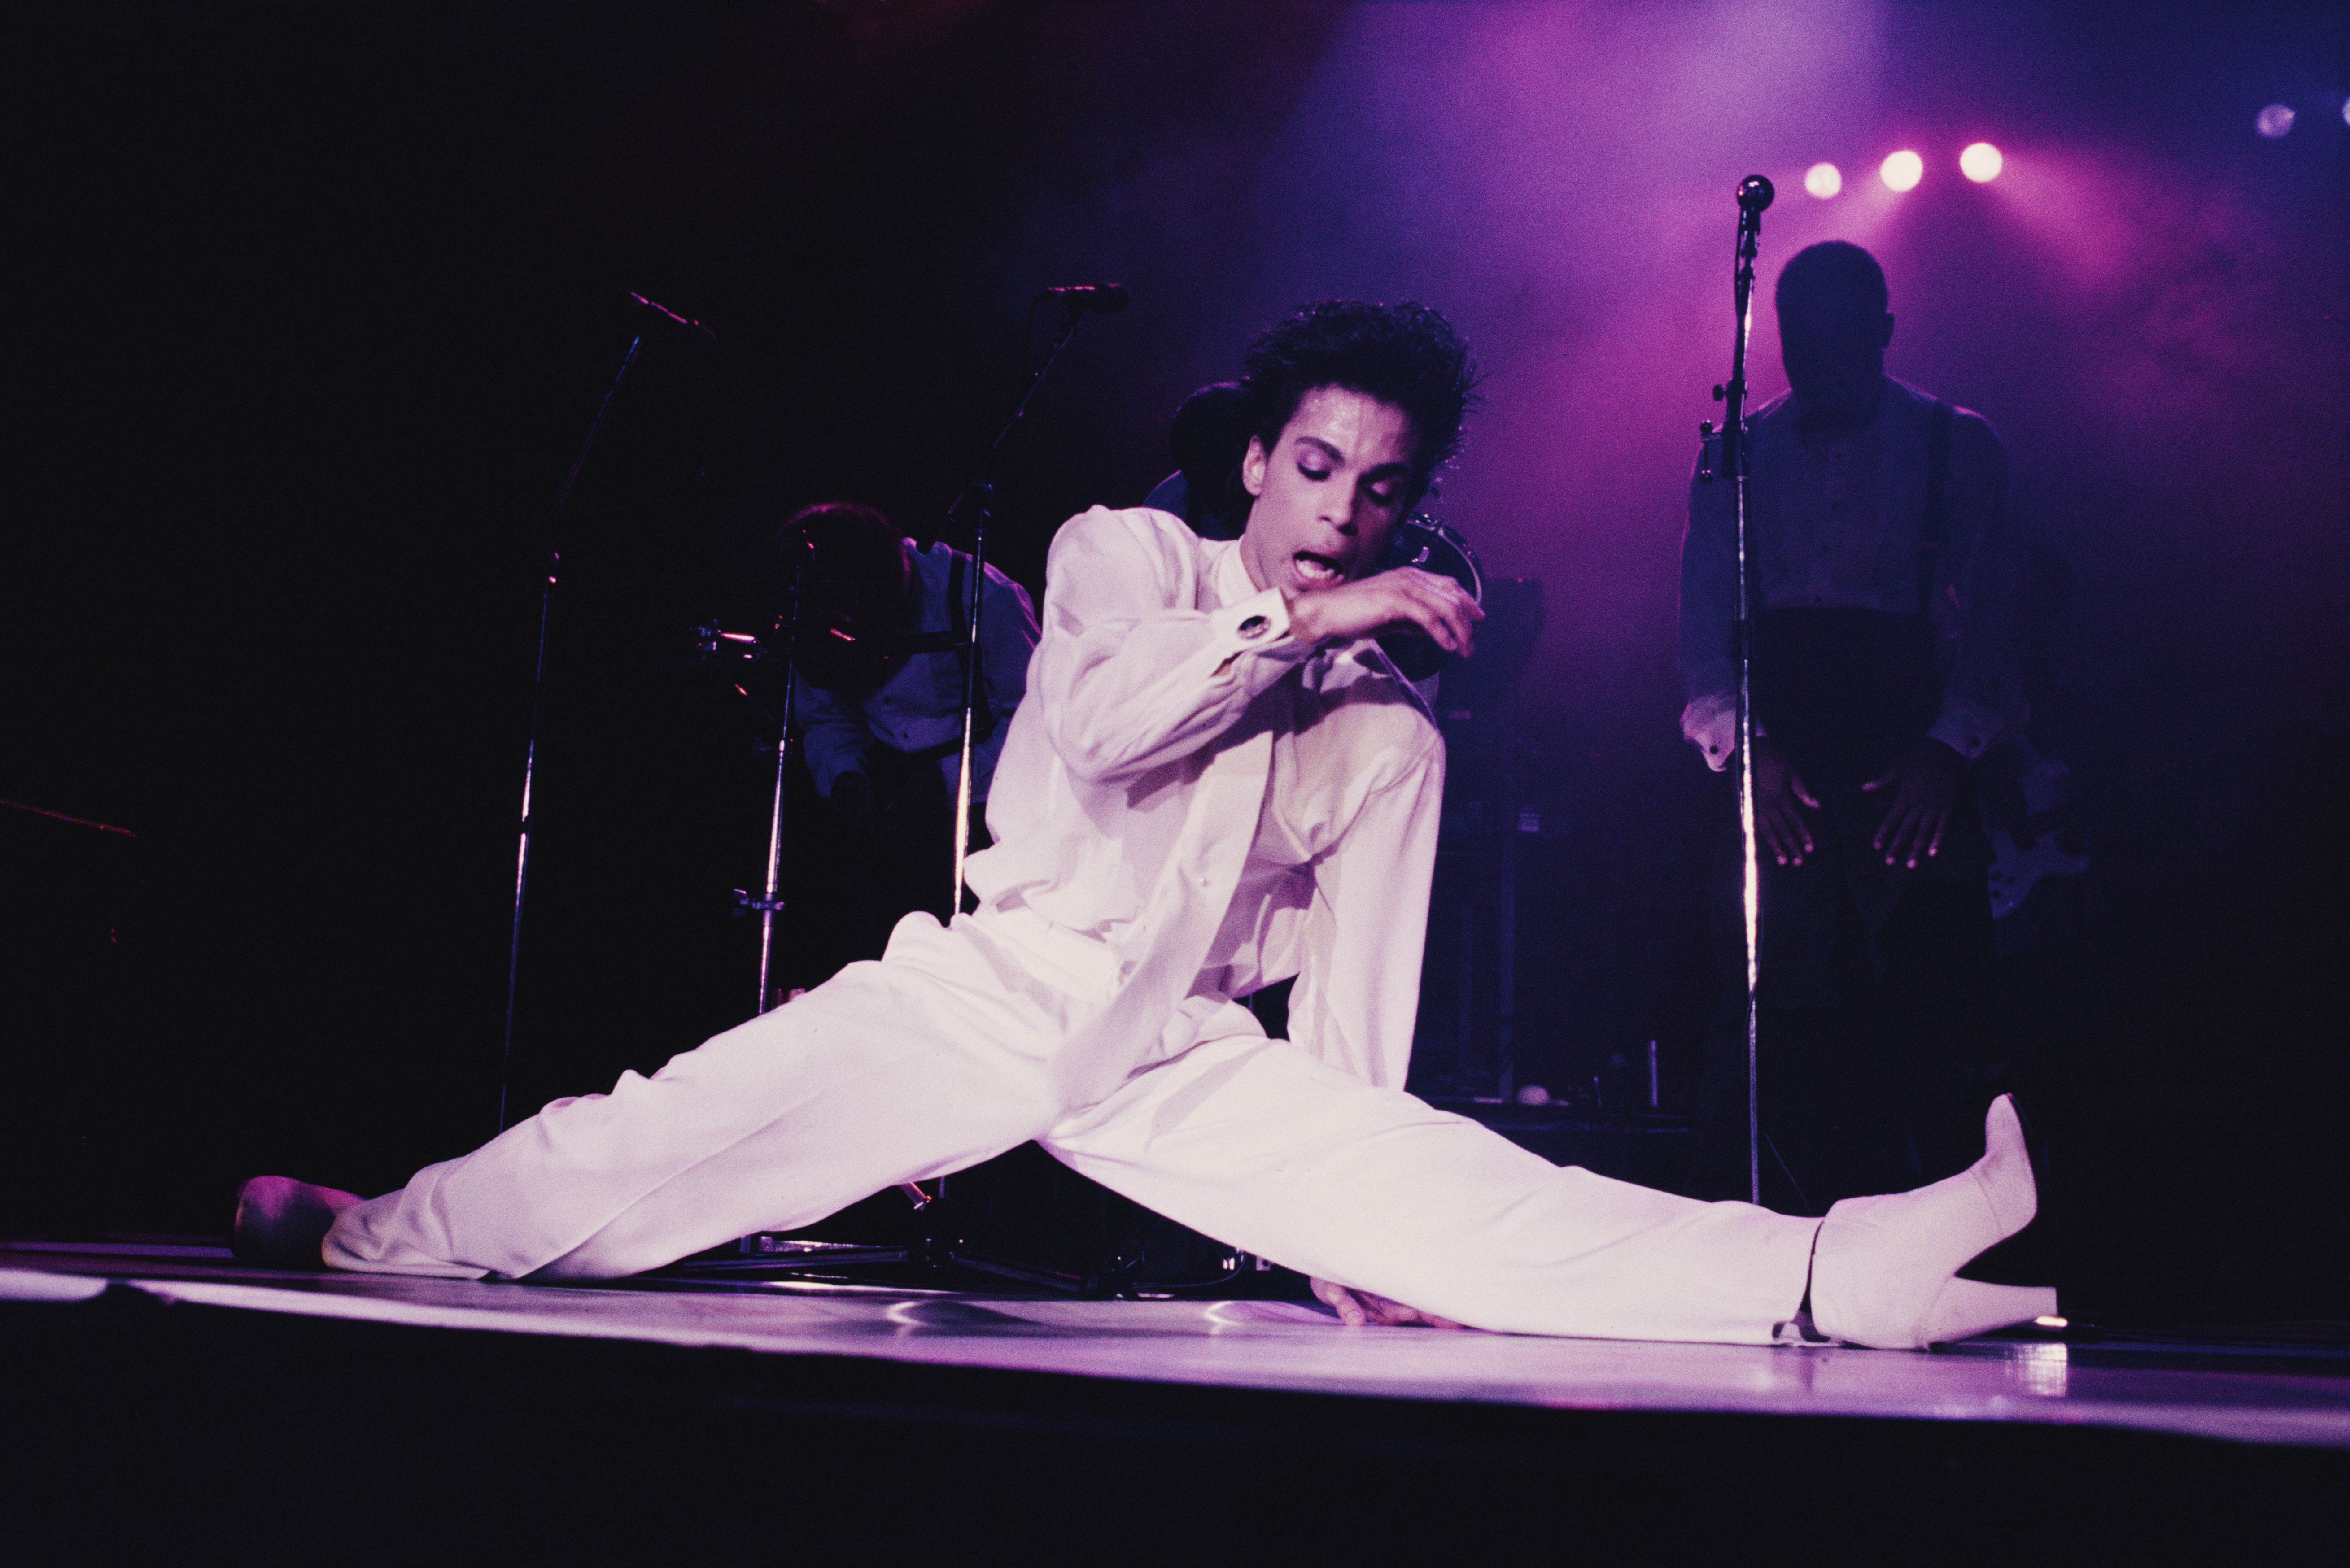 Prince performing during the Hit N Run-Parade tour in August 1986 in Wembley Arena, London | Source: Getty Images